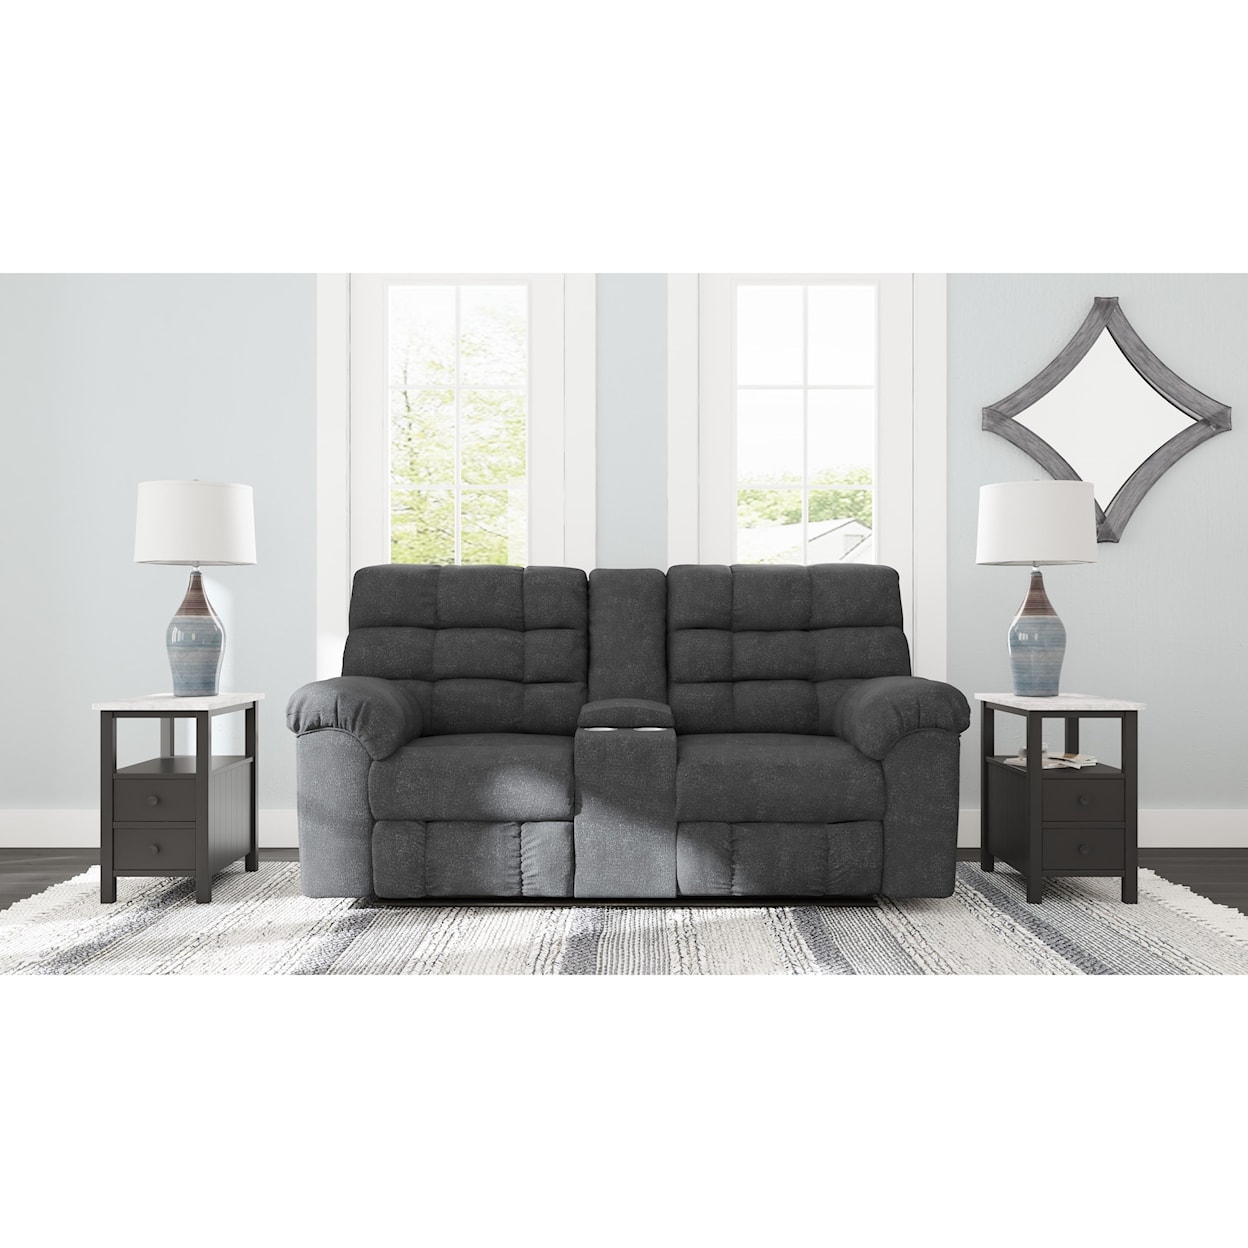 Michael Alan Select Wilhurst Double Reclining Loveseat w/ Console